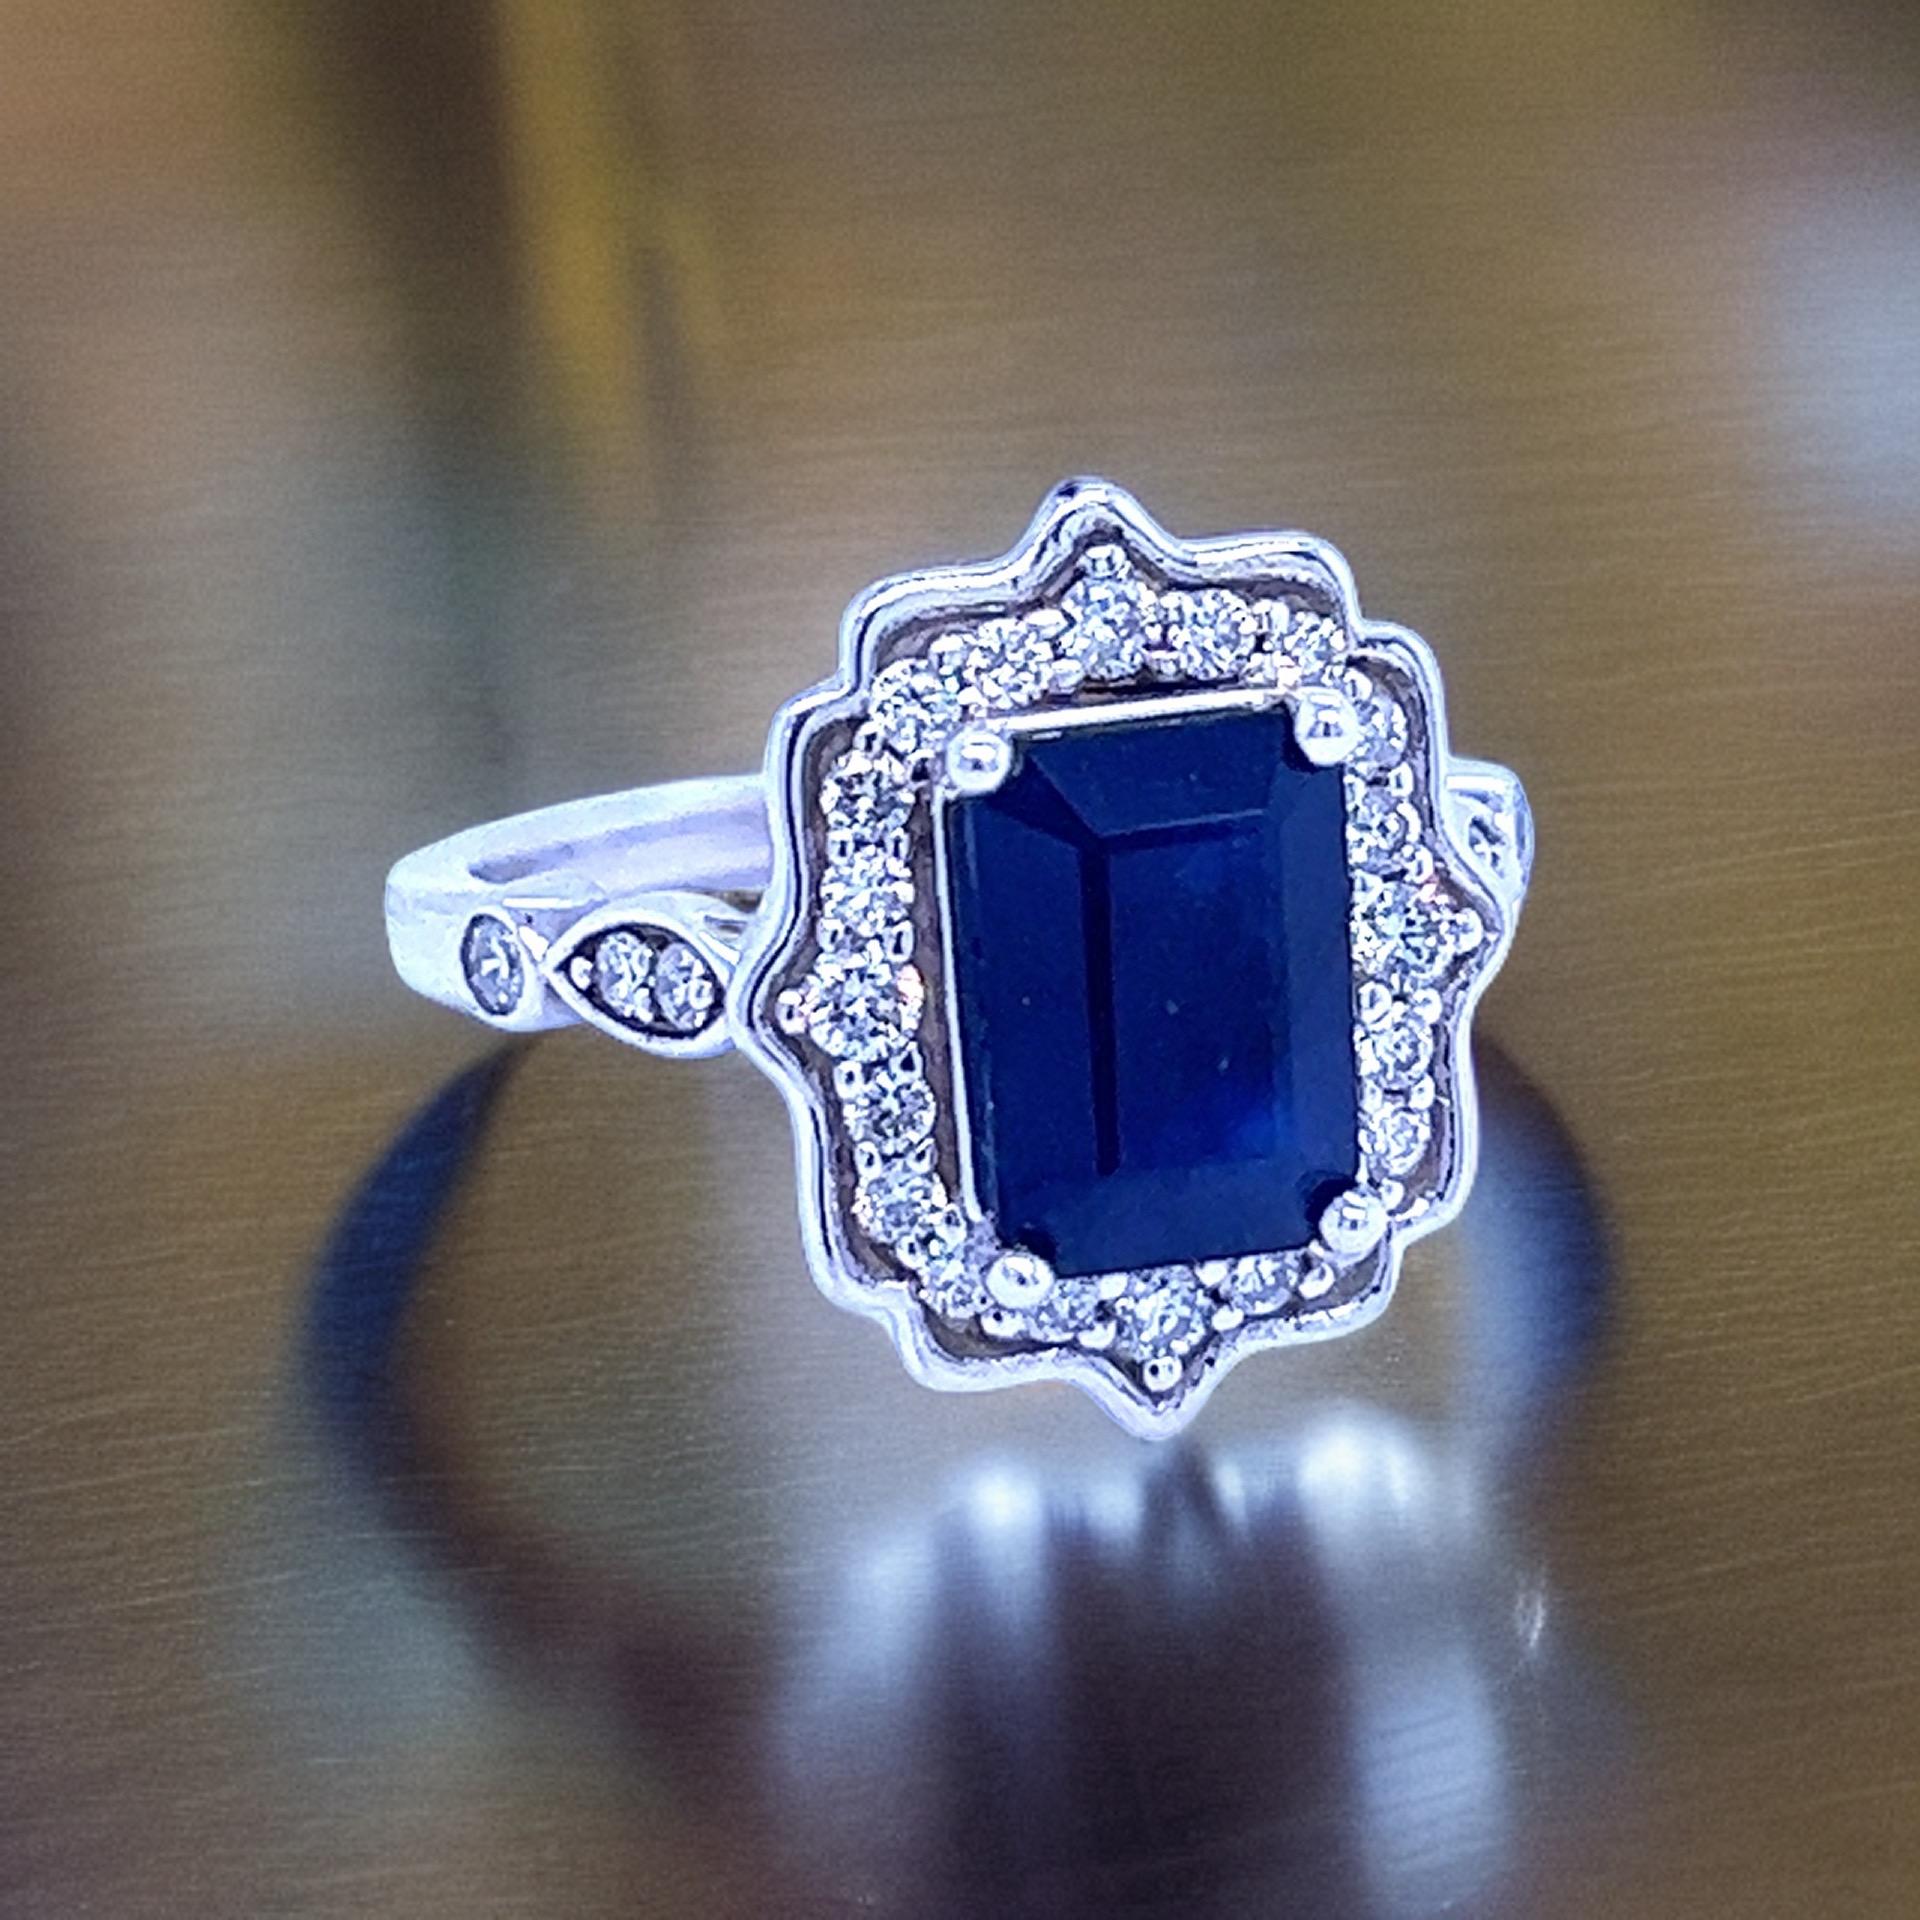 Natural Sapphire Diamond Ring 6.5 14k White Gold 3.51 TCW Certified For Sale 3